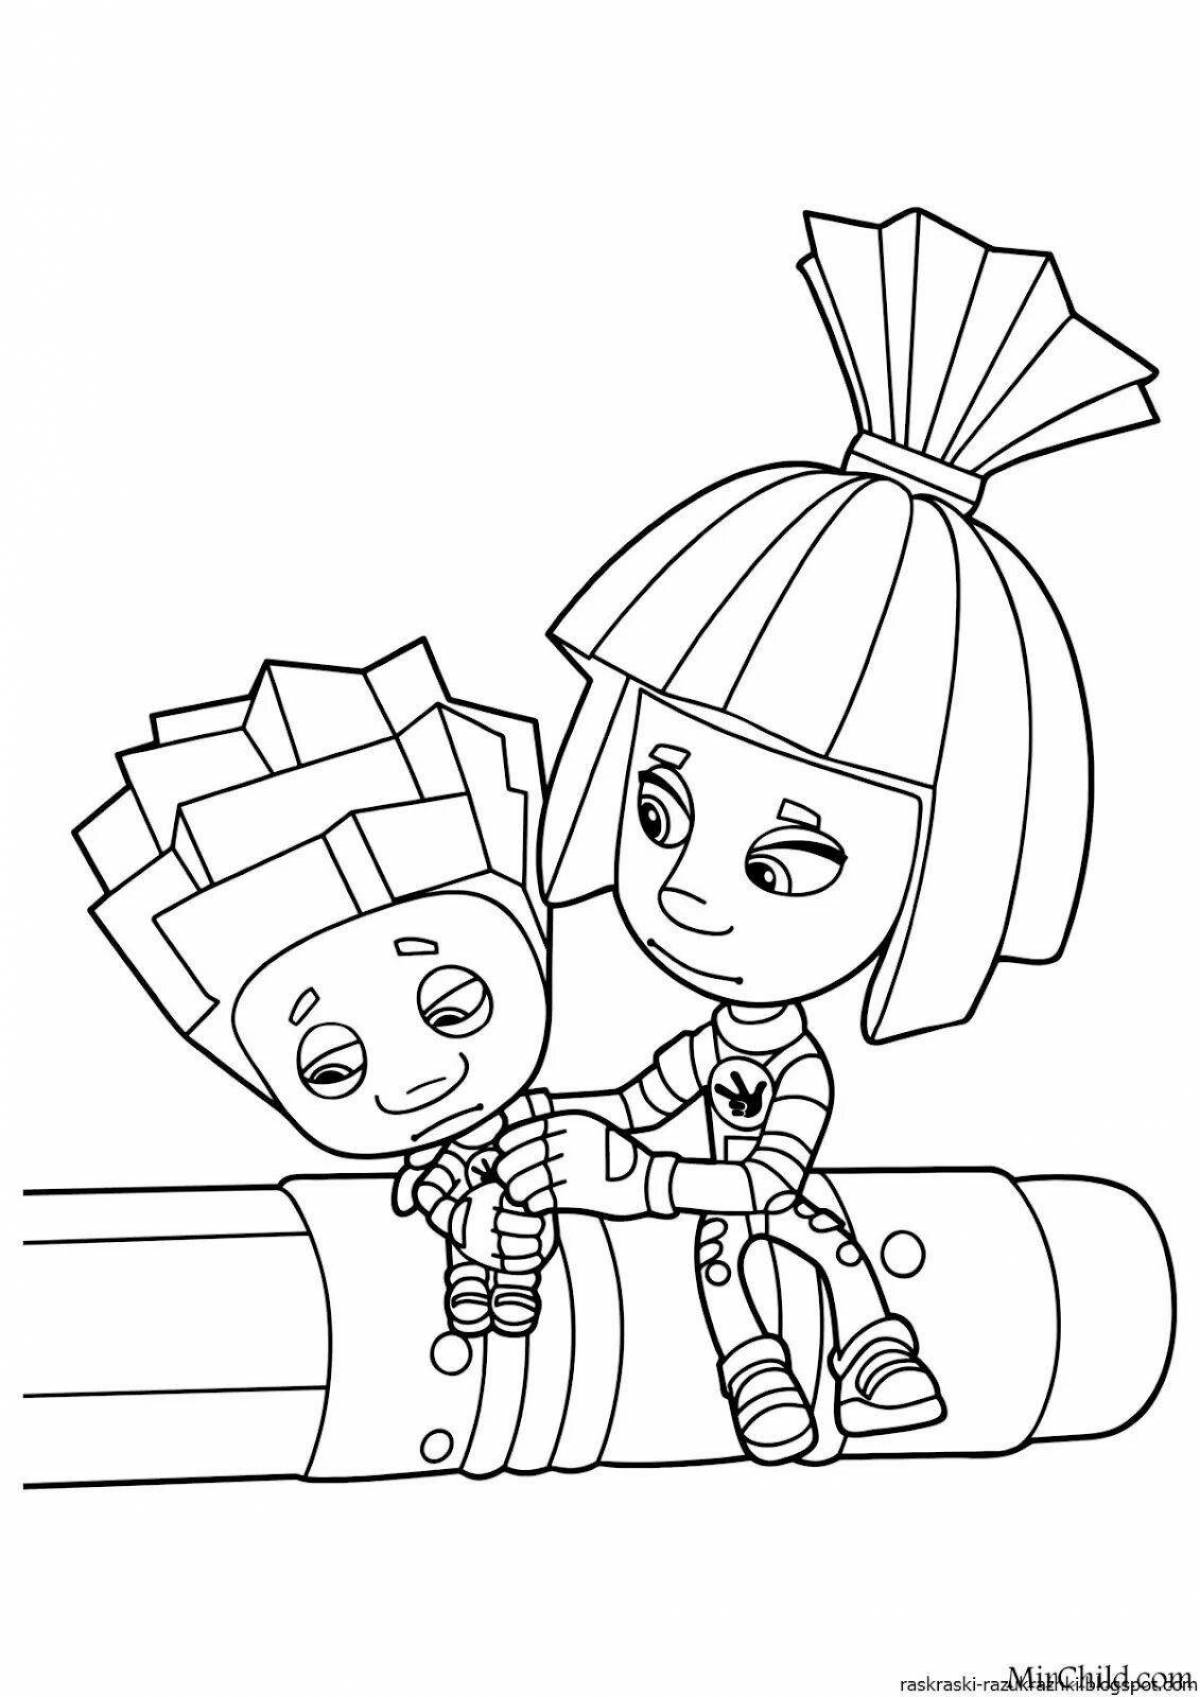 Cute fixie coloring pages for girls